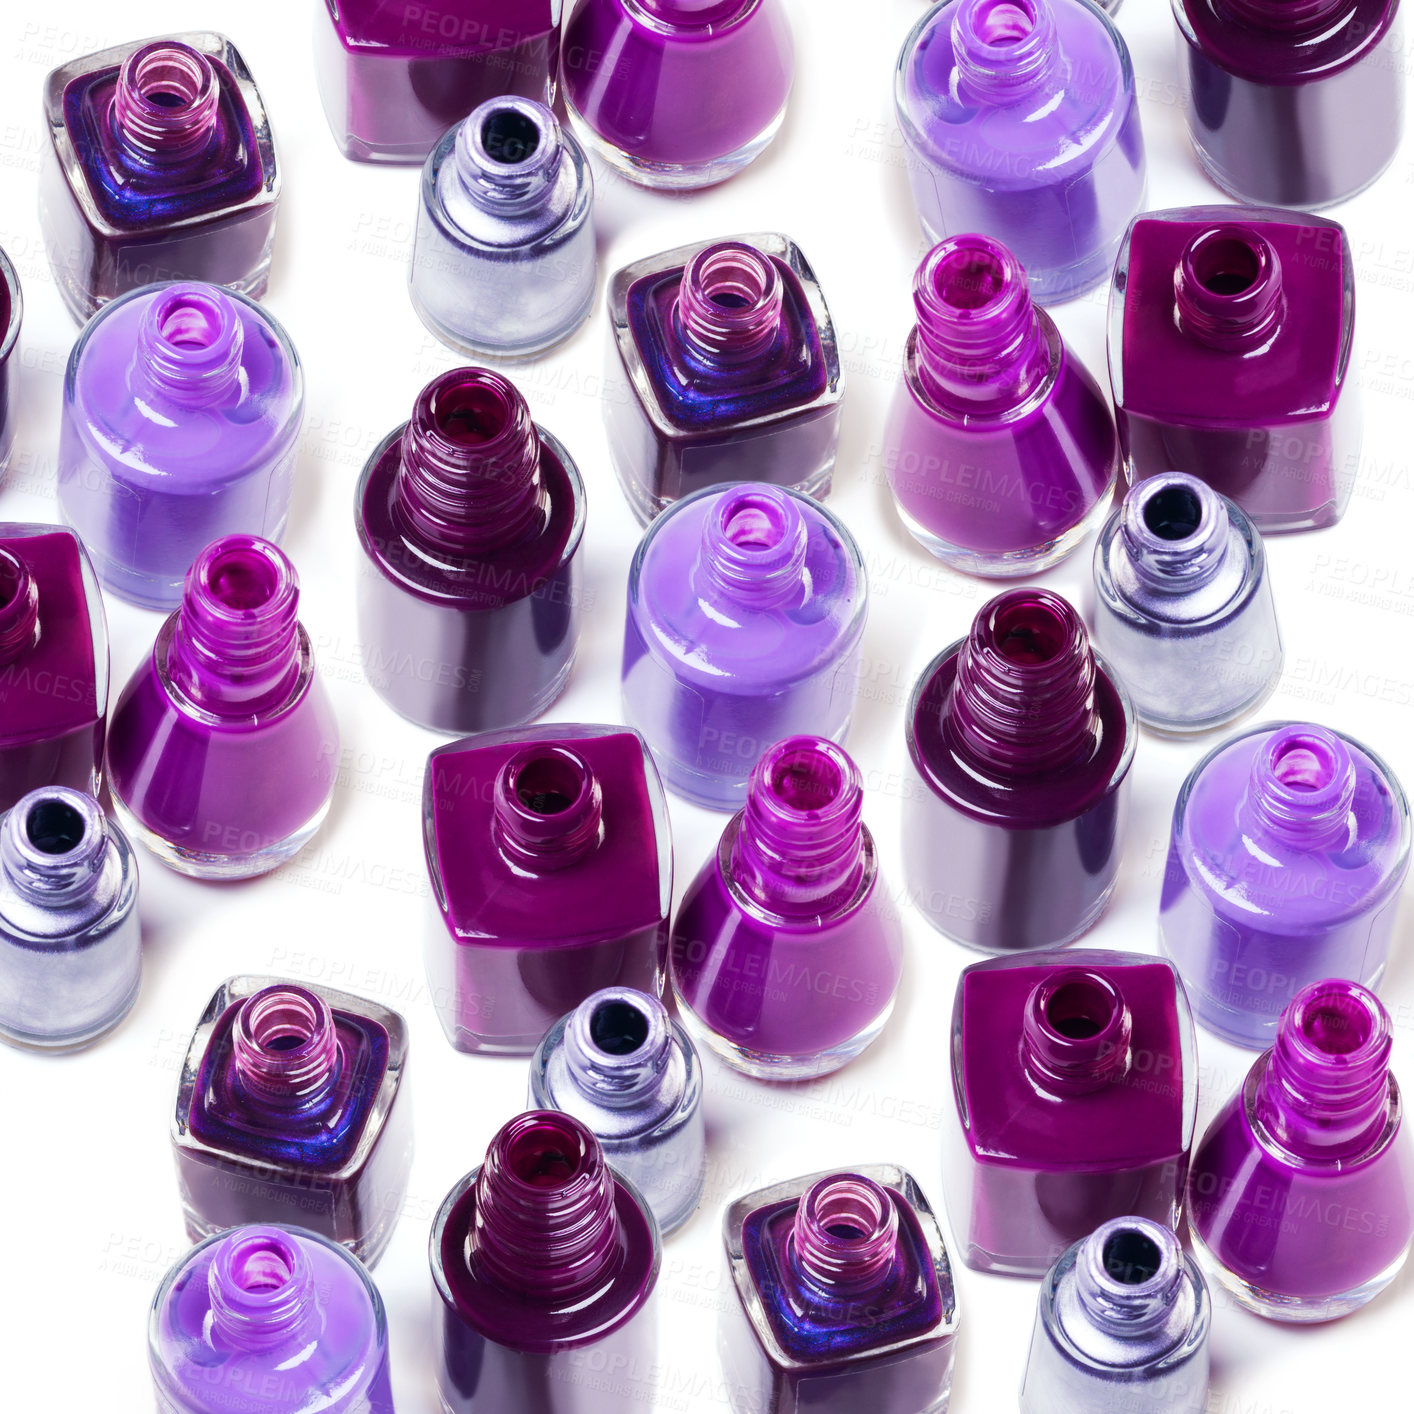 Buy stock photo Nail polish, purple aesthetic and bottle on a white background for beauty, cosmetics and salon products. Cosmetology, luxury spa and isolated color for manicure, pedicure and pamper nails in studio